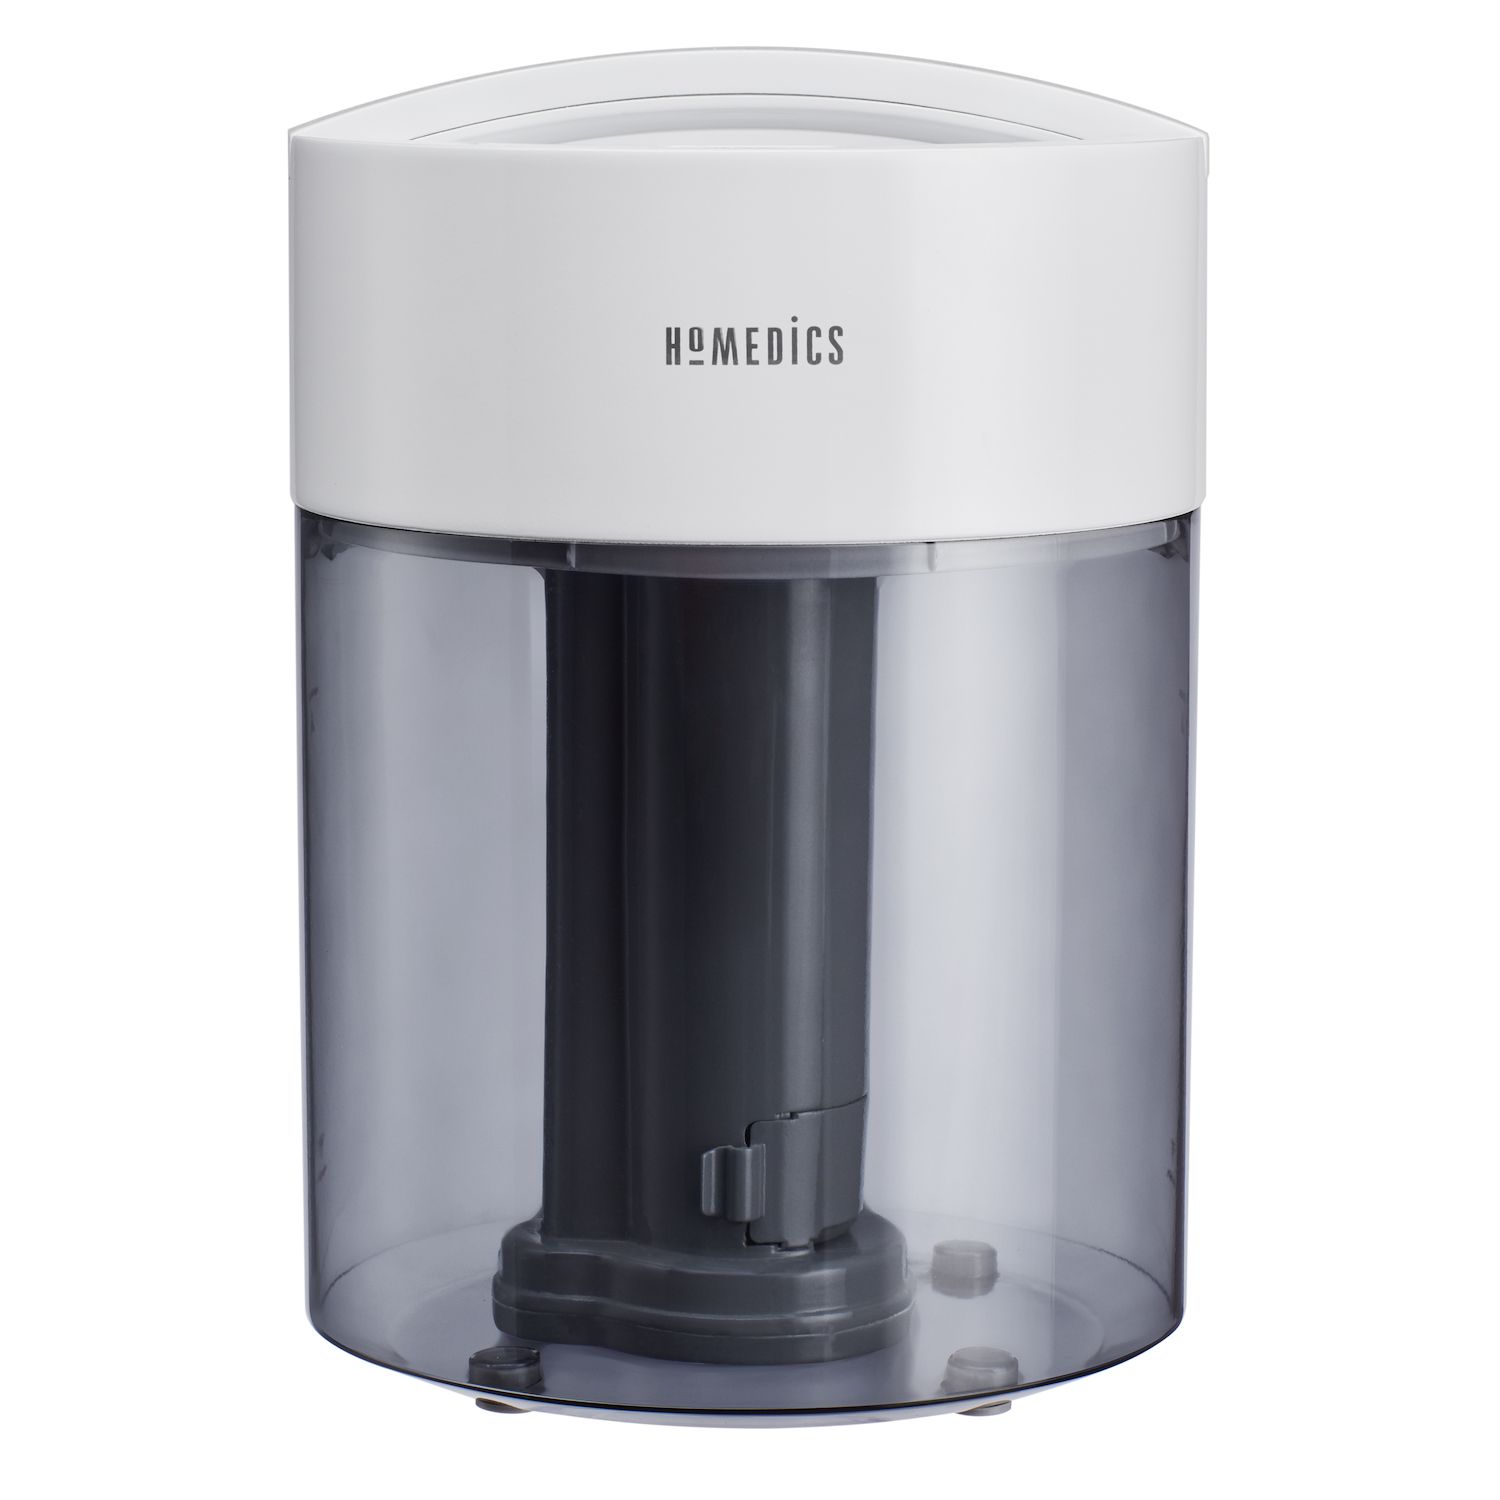 Image for HoMedics No Leak Ultra Quiet Humidifier with UV-C Technology at Kohl's.